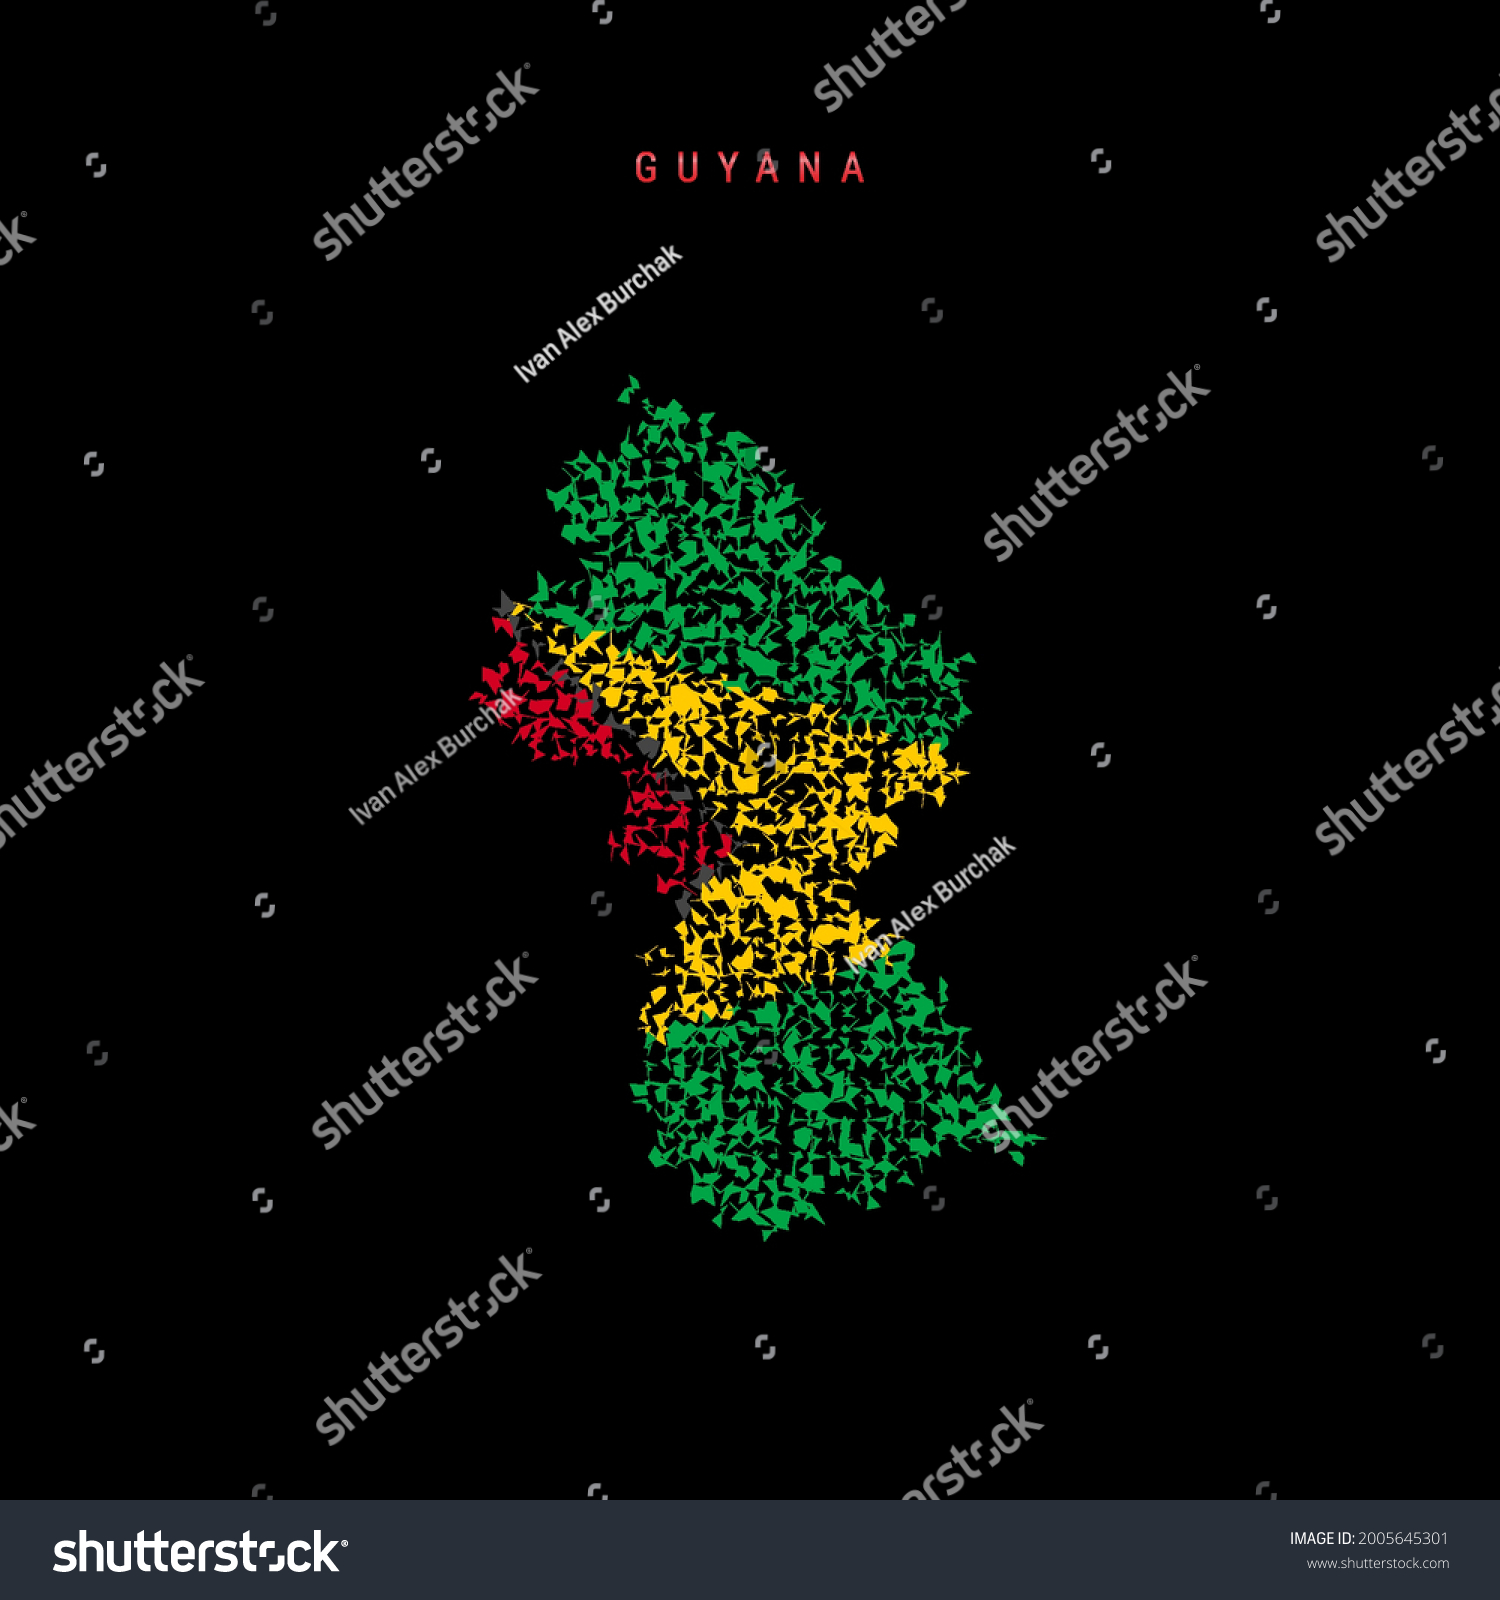 SVG of Guyana flag map, chaotic particles pattern in the colors of the Guyanese flag. Vector illustration isolated on black background. svg